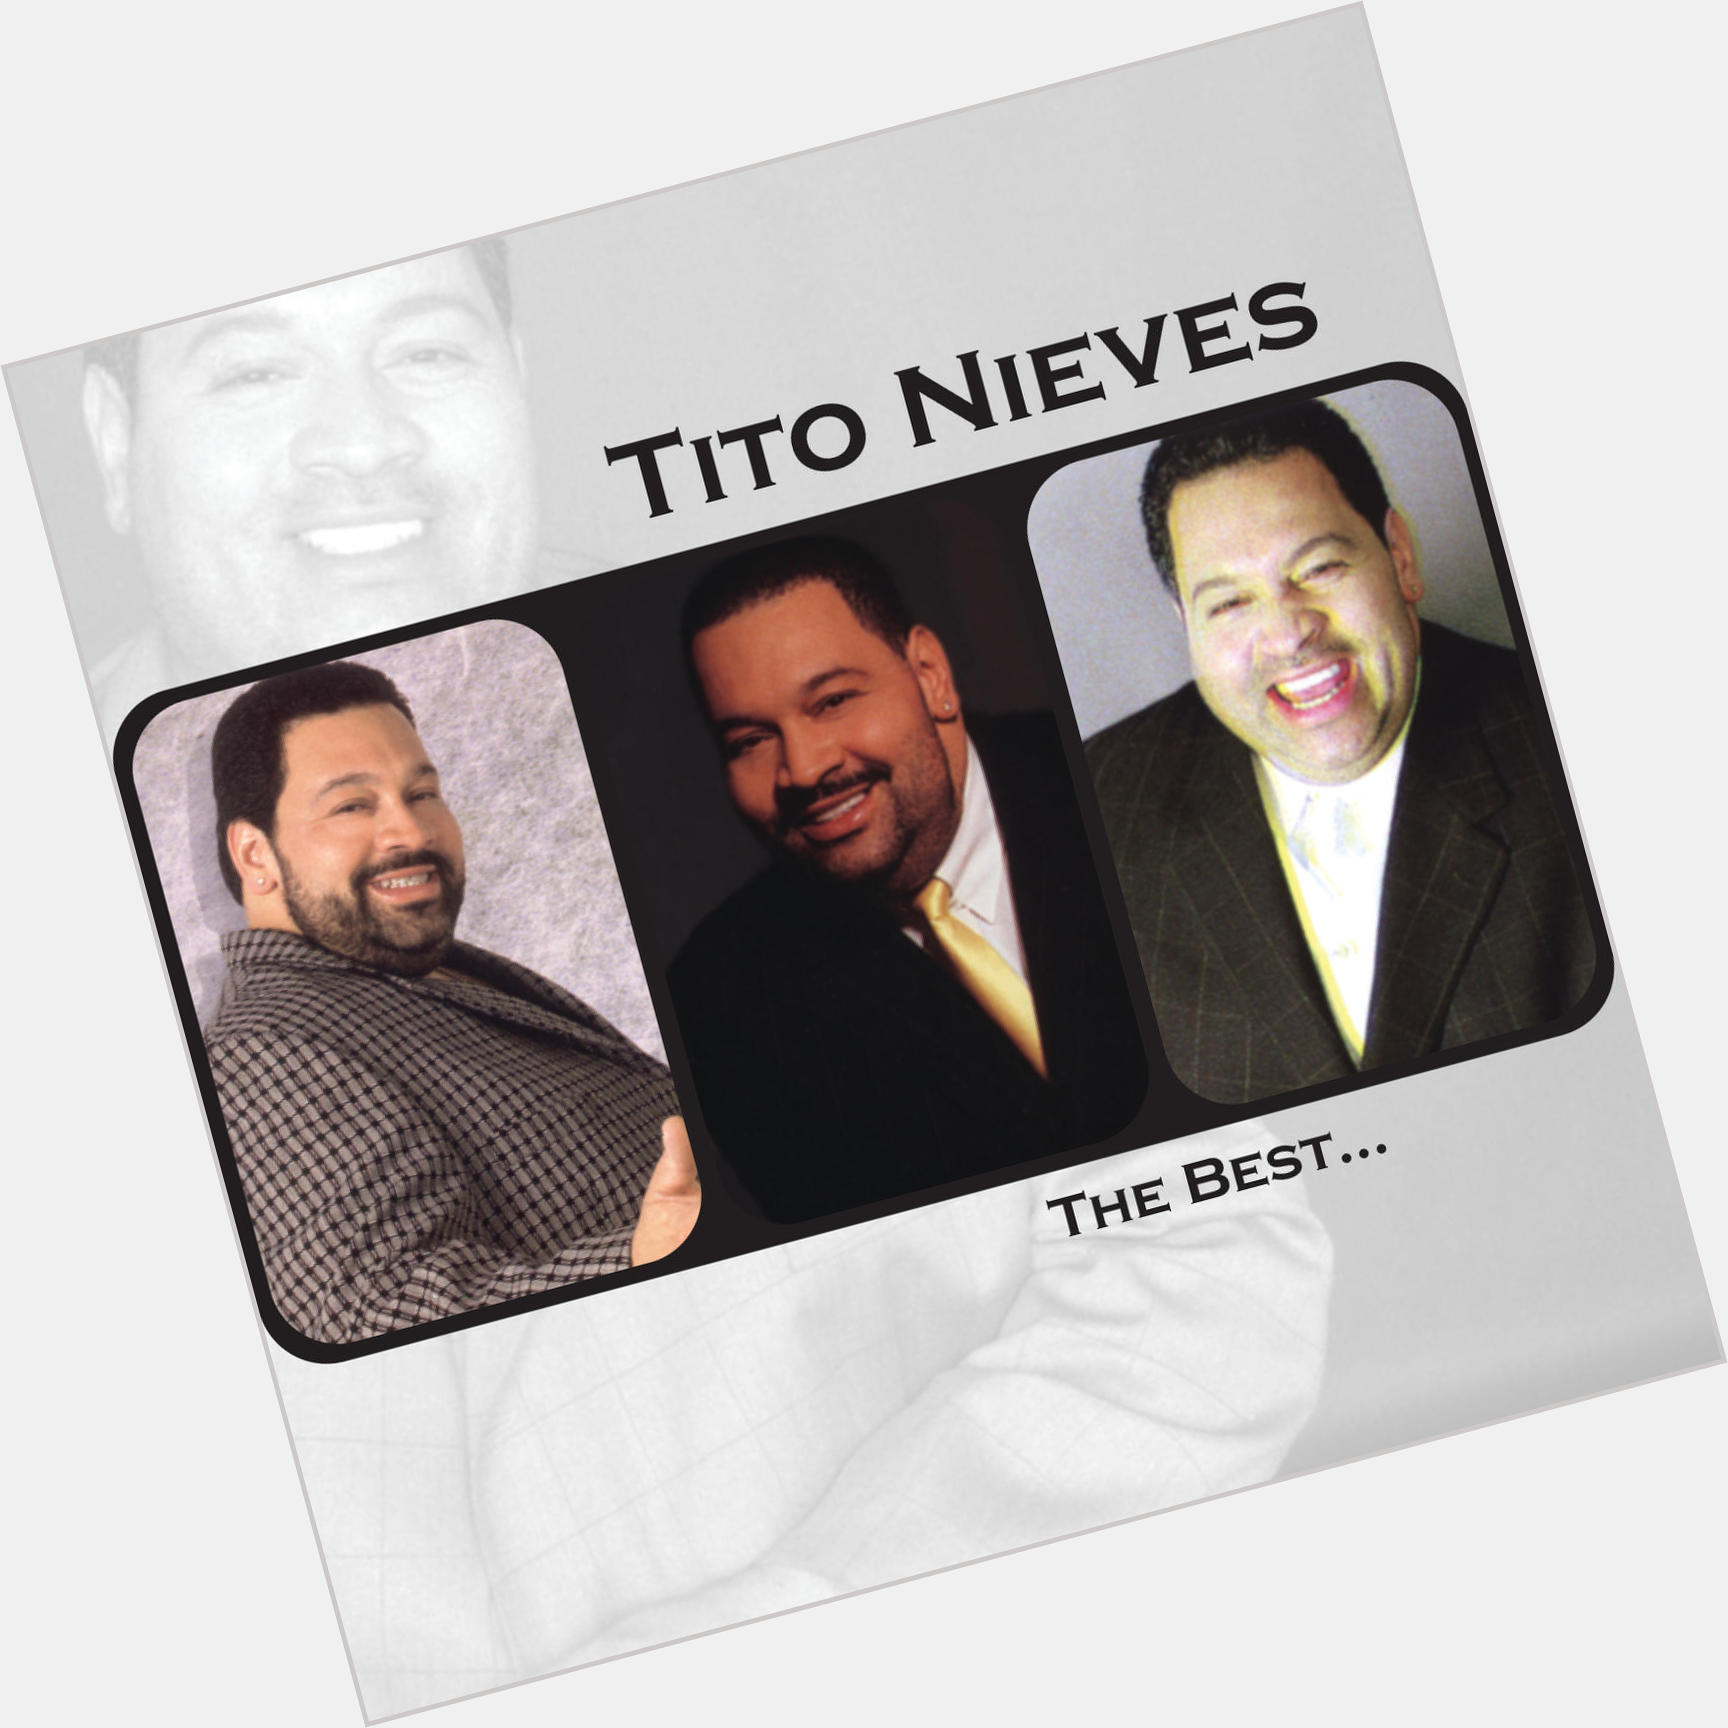 Tito Nieves exclusive hot pic 5.jpg